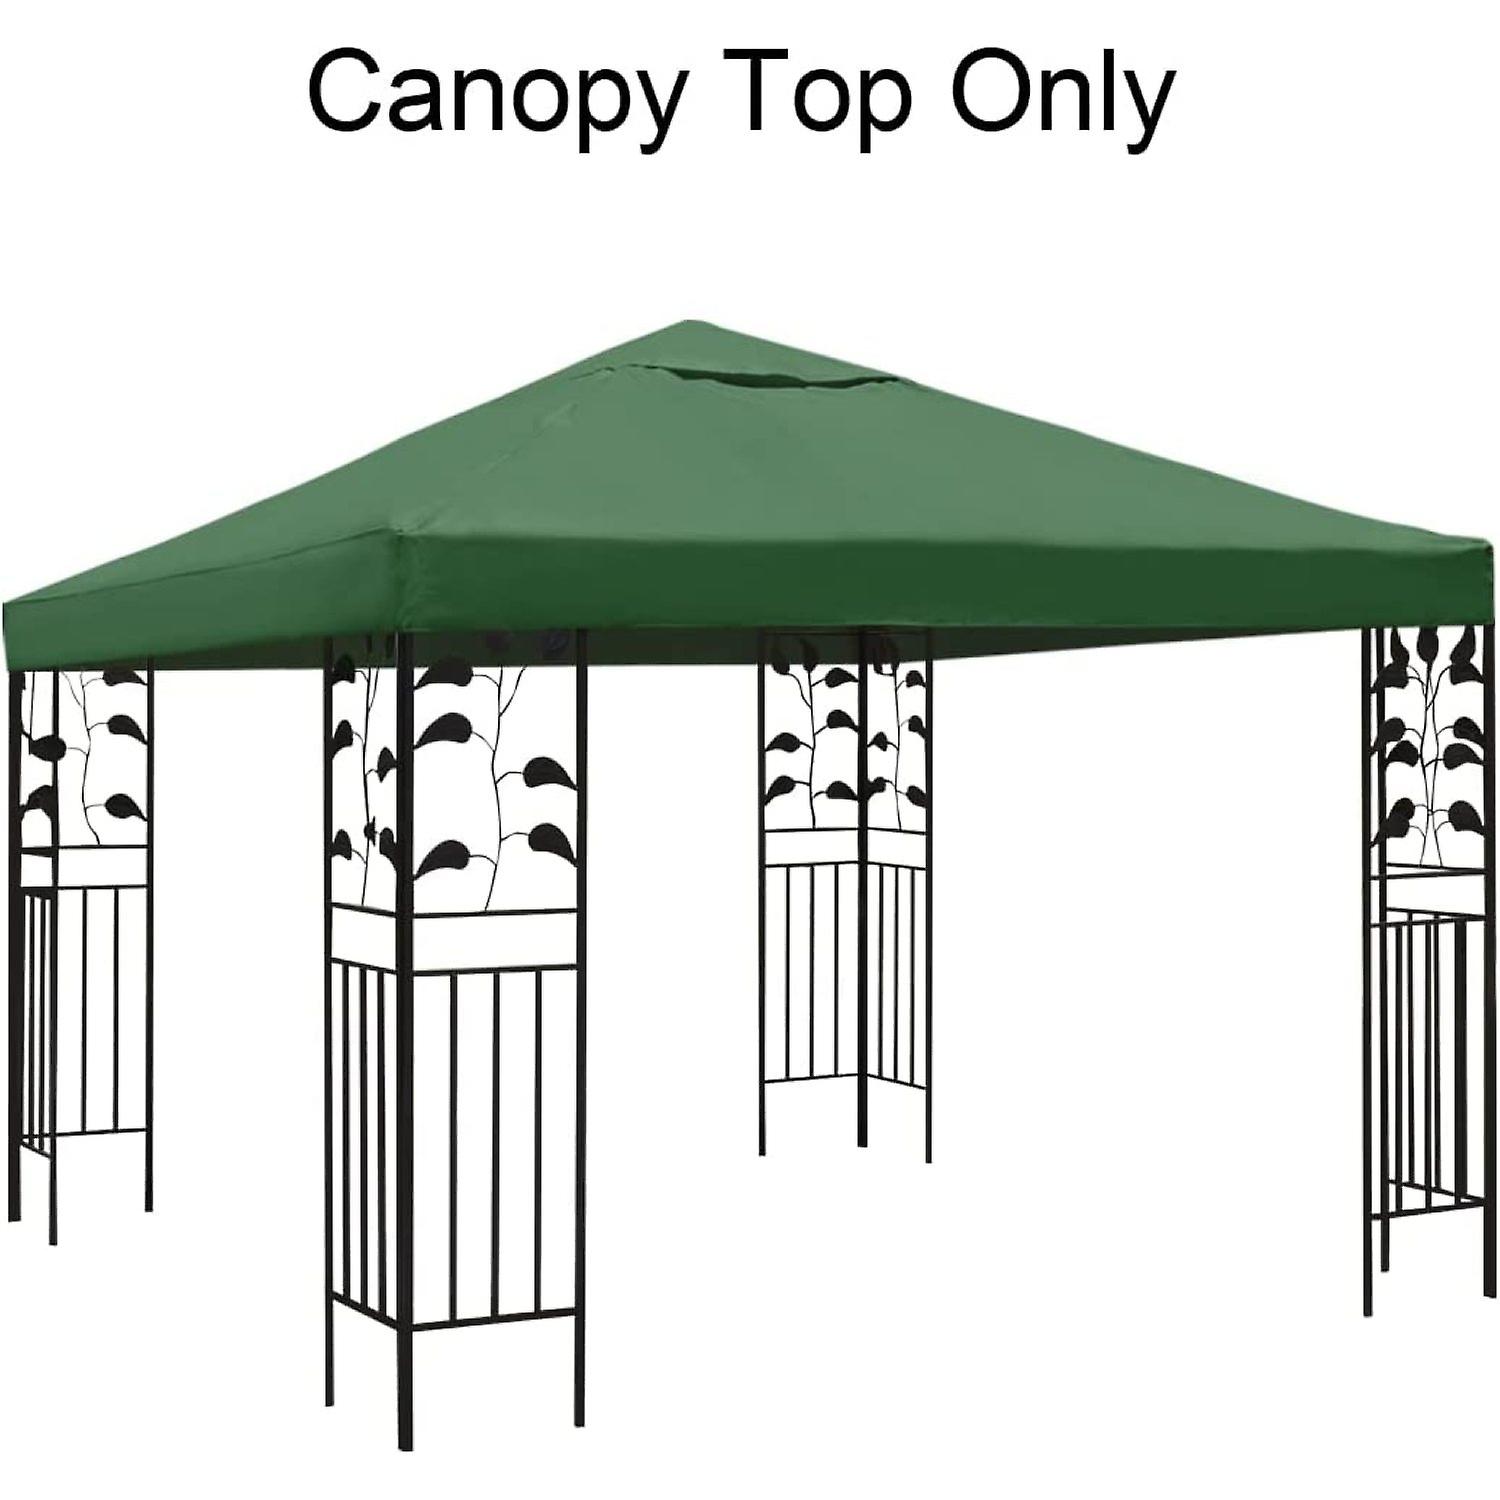 10'x10' Canopy Replacement Cover Gazebos and Pergolas Pop Up Tent Shelter Sunshade Waterproof Roof Top With Air Vent